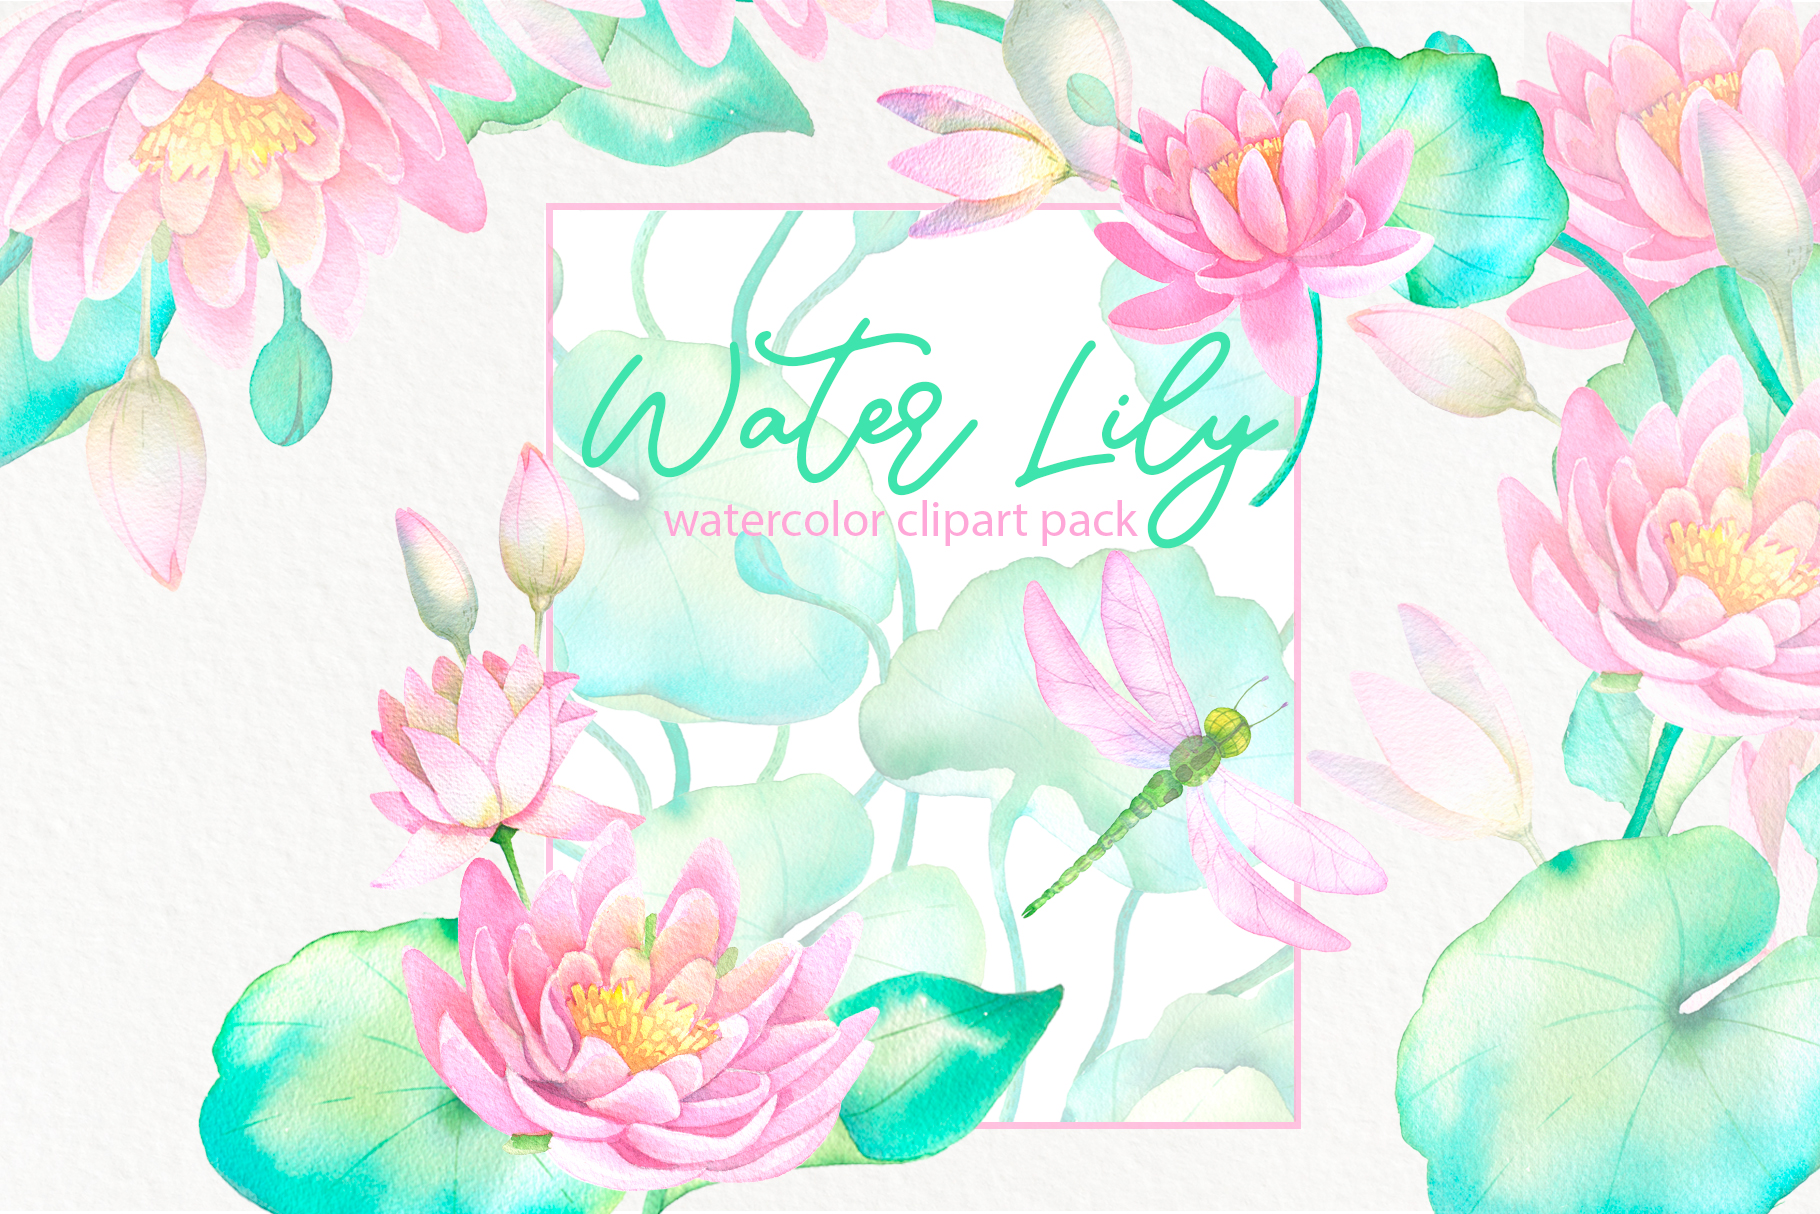 Waterlily templ0